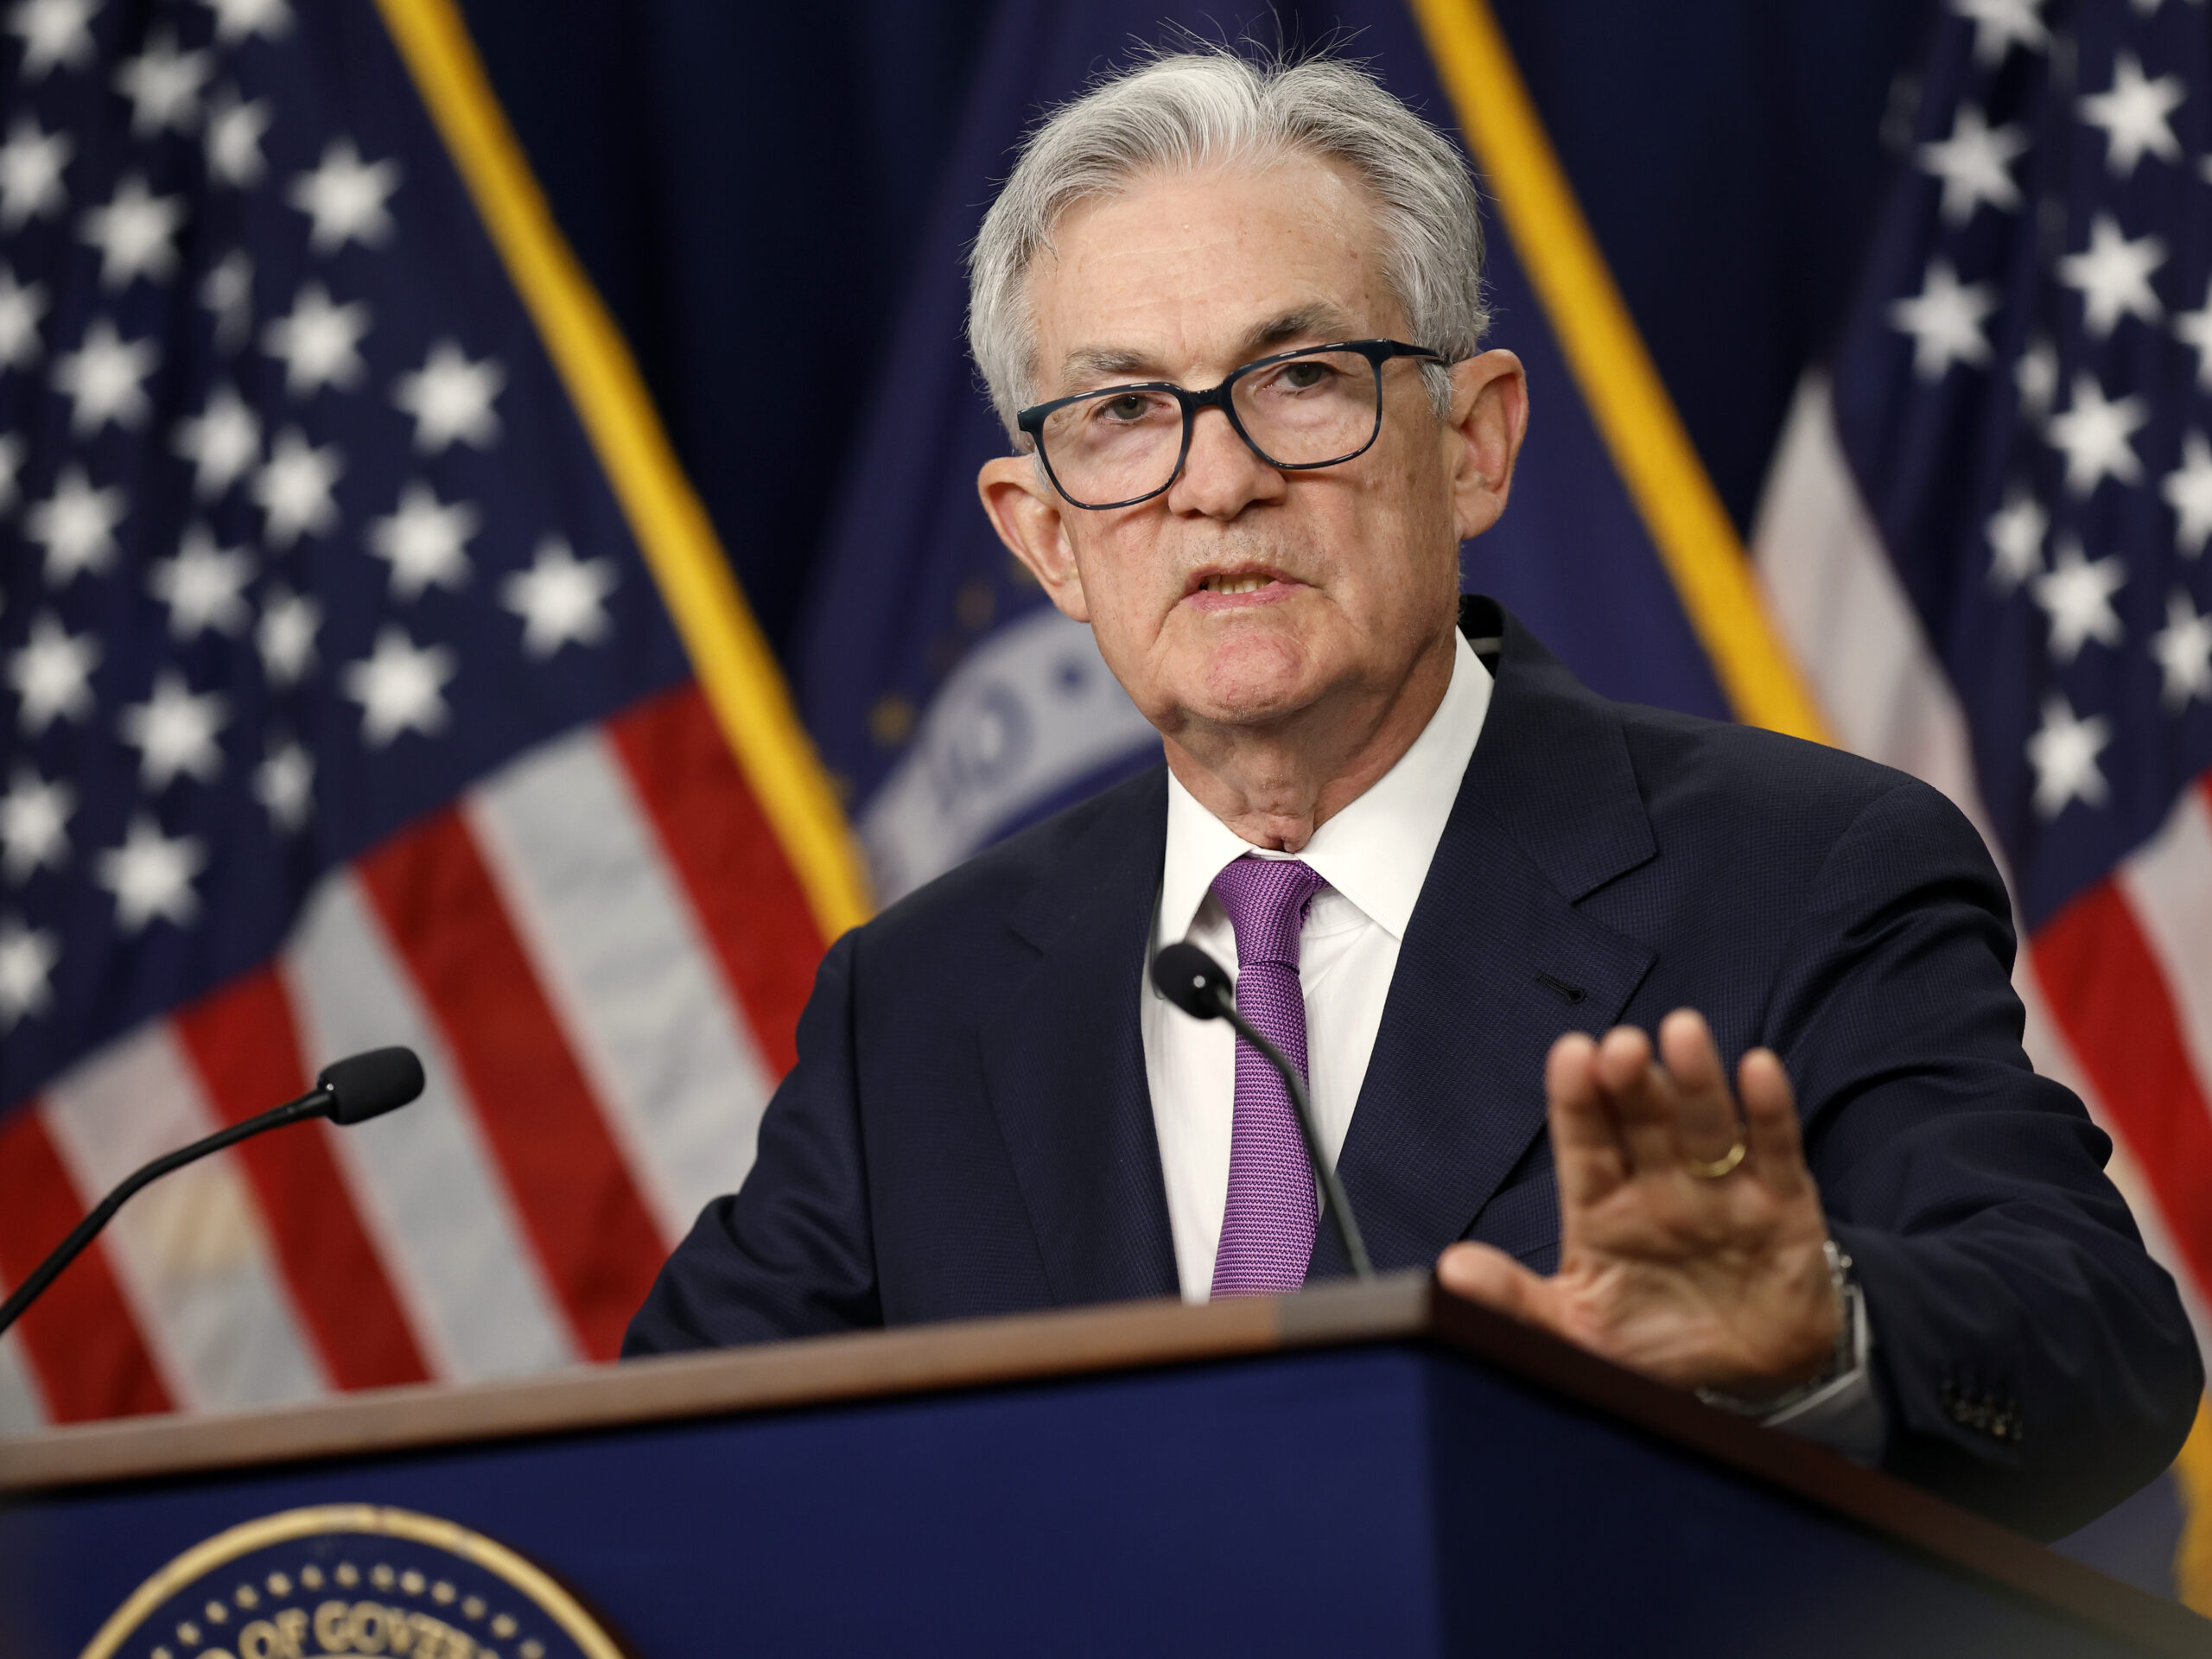 The Federal Reserve holds interest rates steady but signals rate cuts may be coming